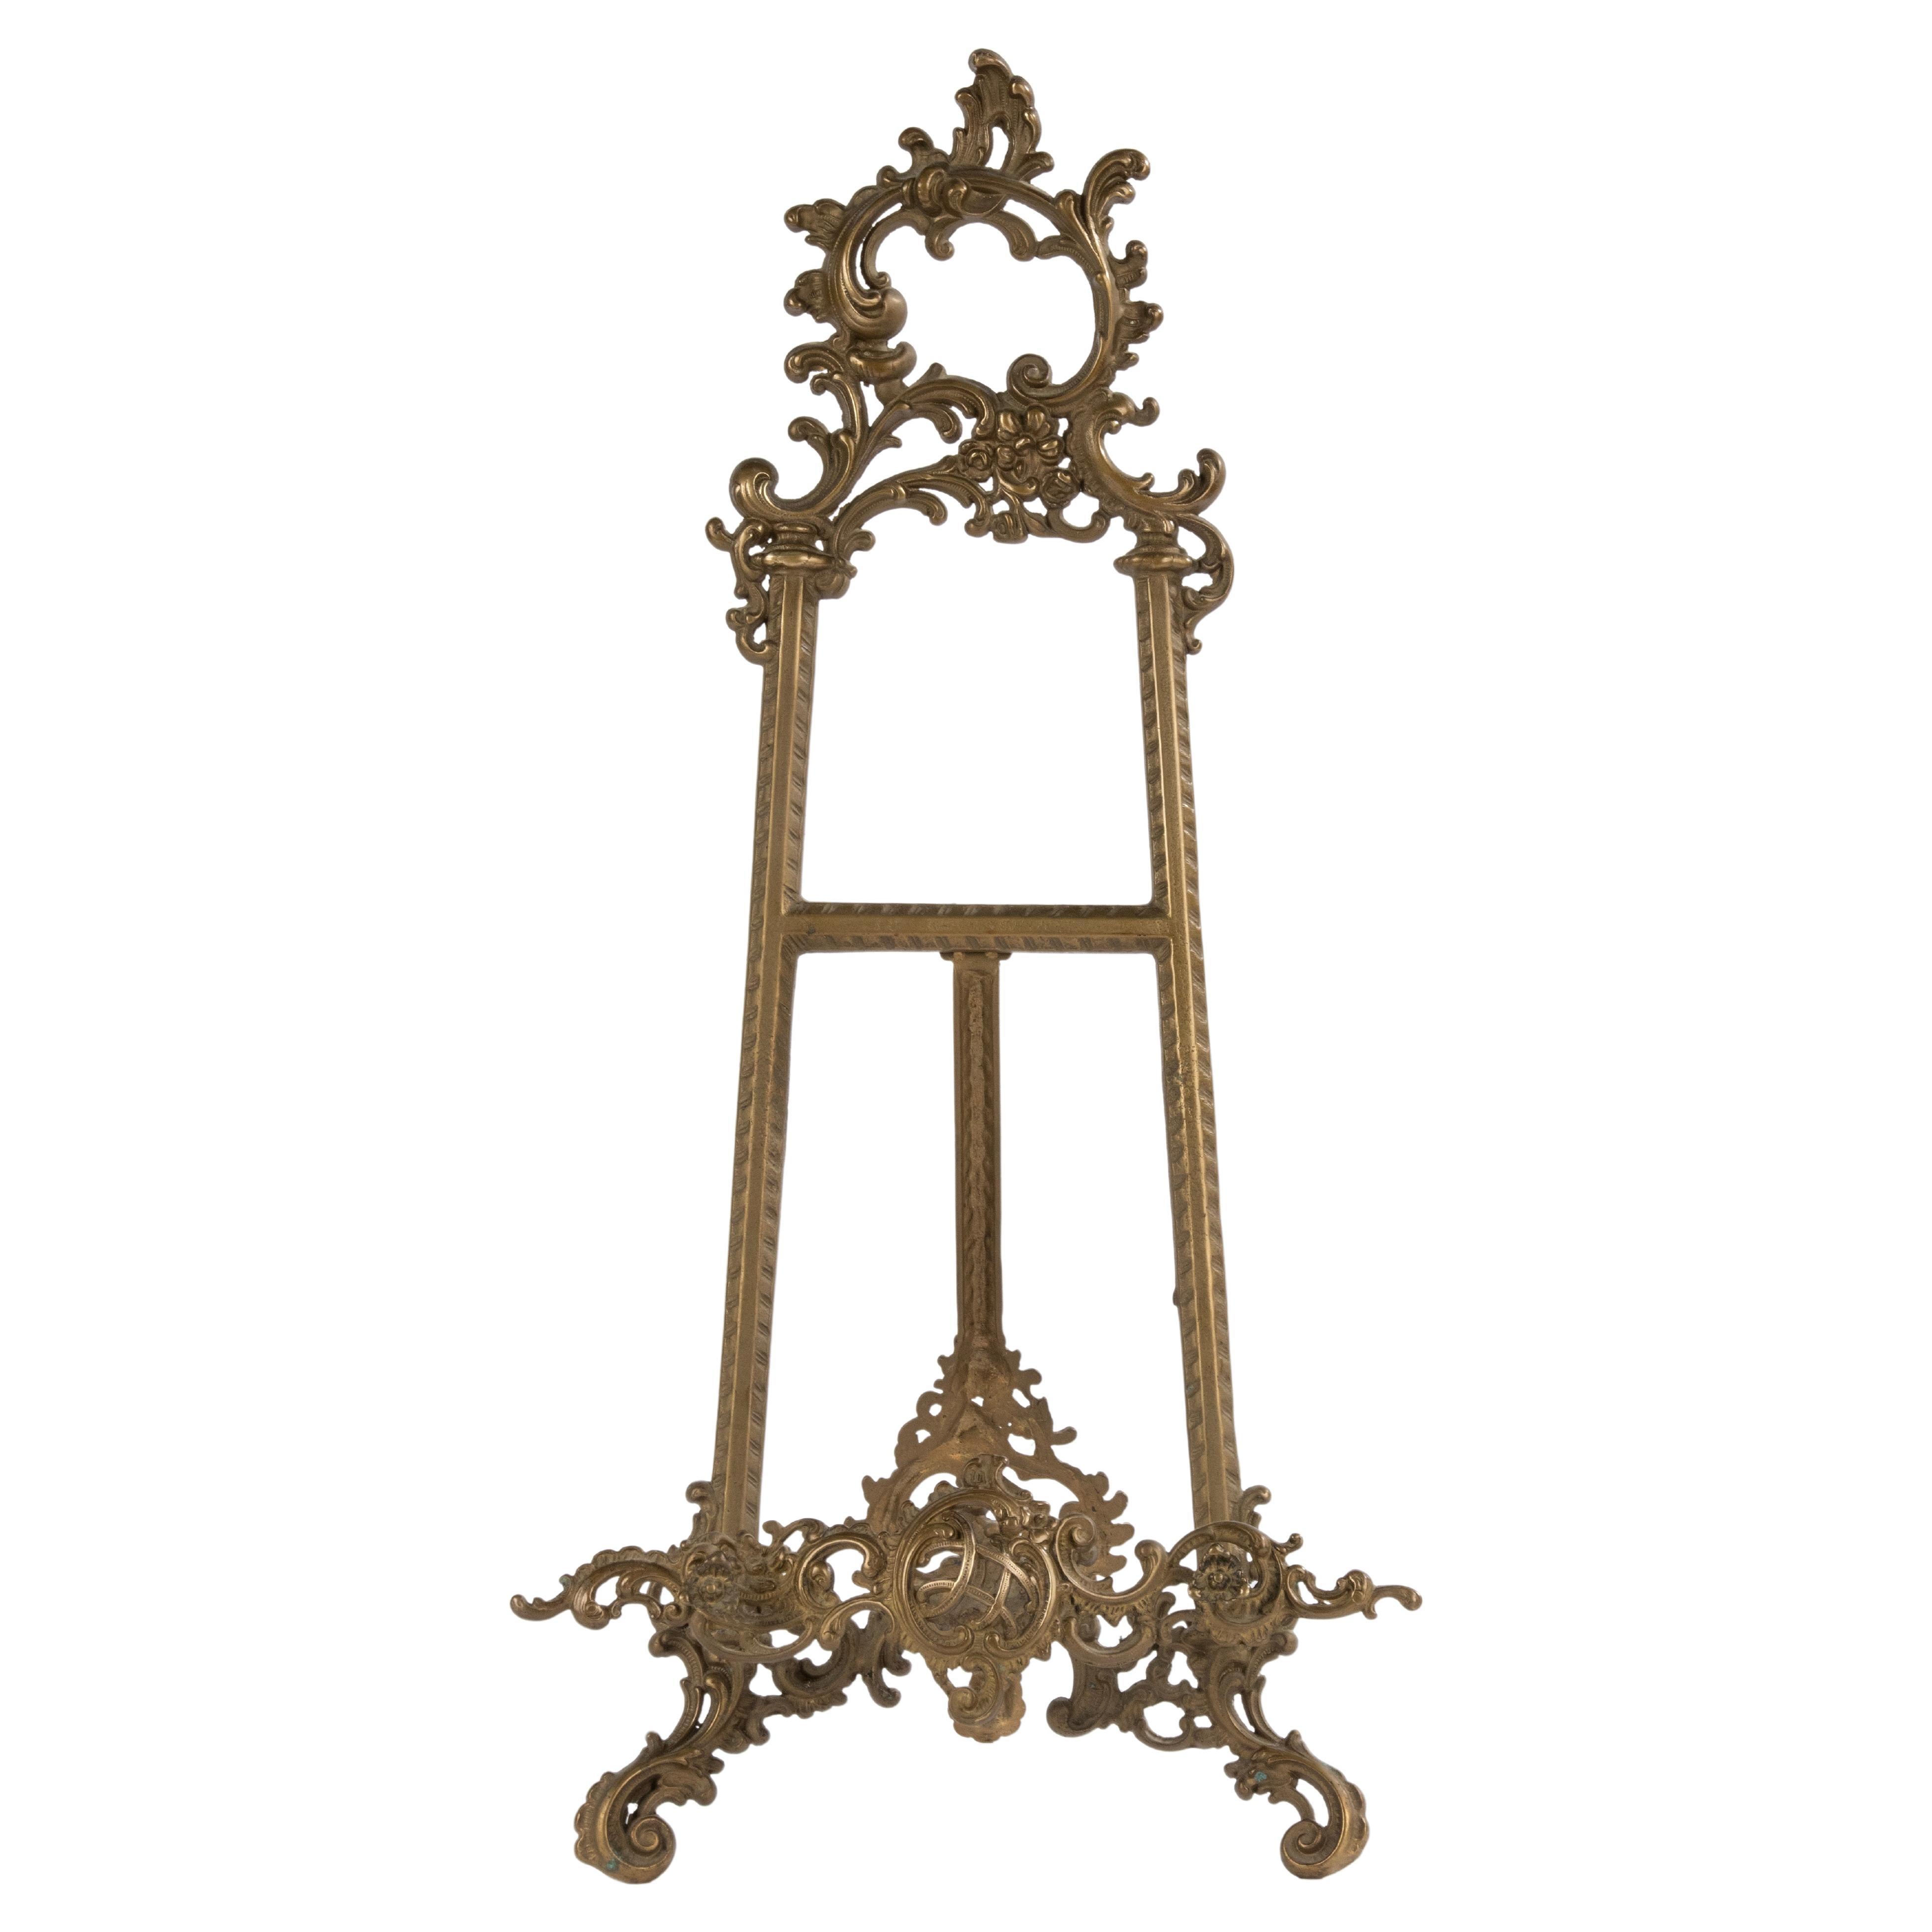 Early 20th Century Display Stand for Books or Paintings - Brass - Rococo Style 